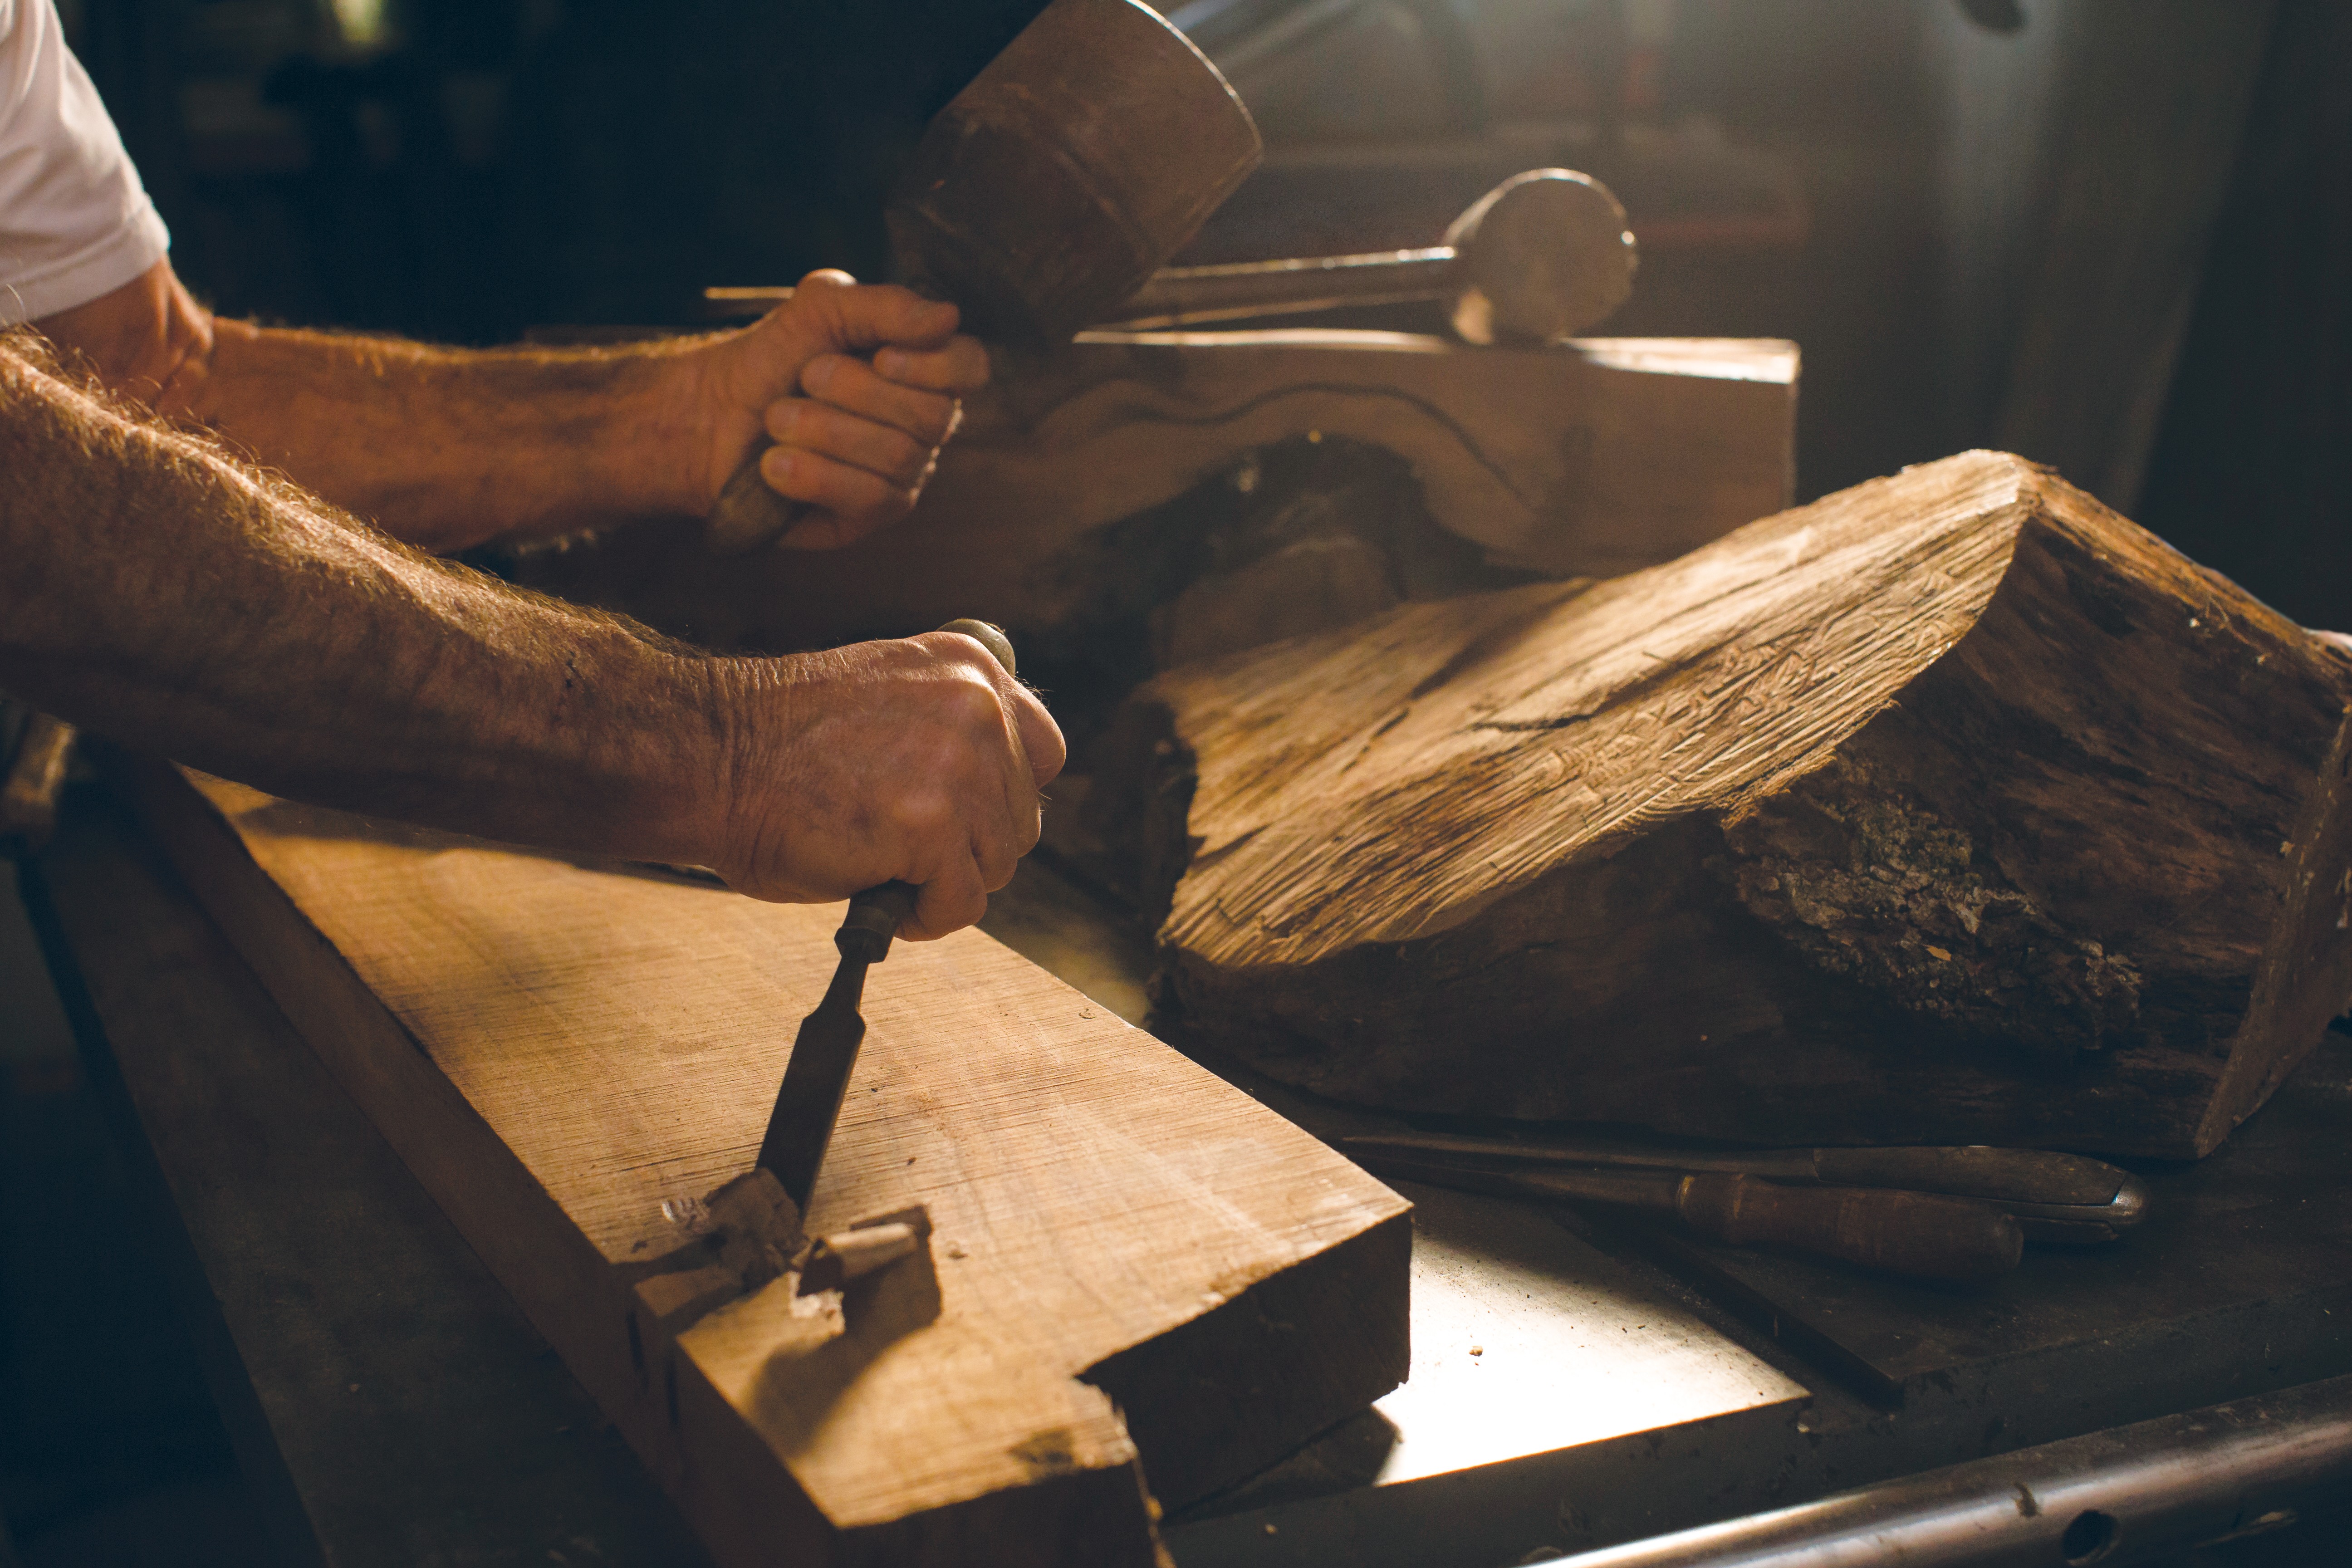 A close-up photograph of a carpenter working in his workshop.